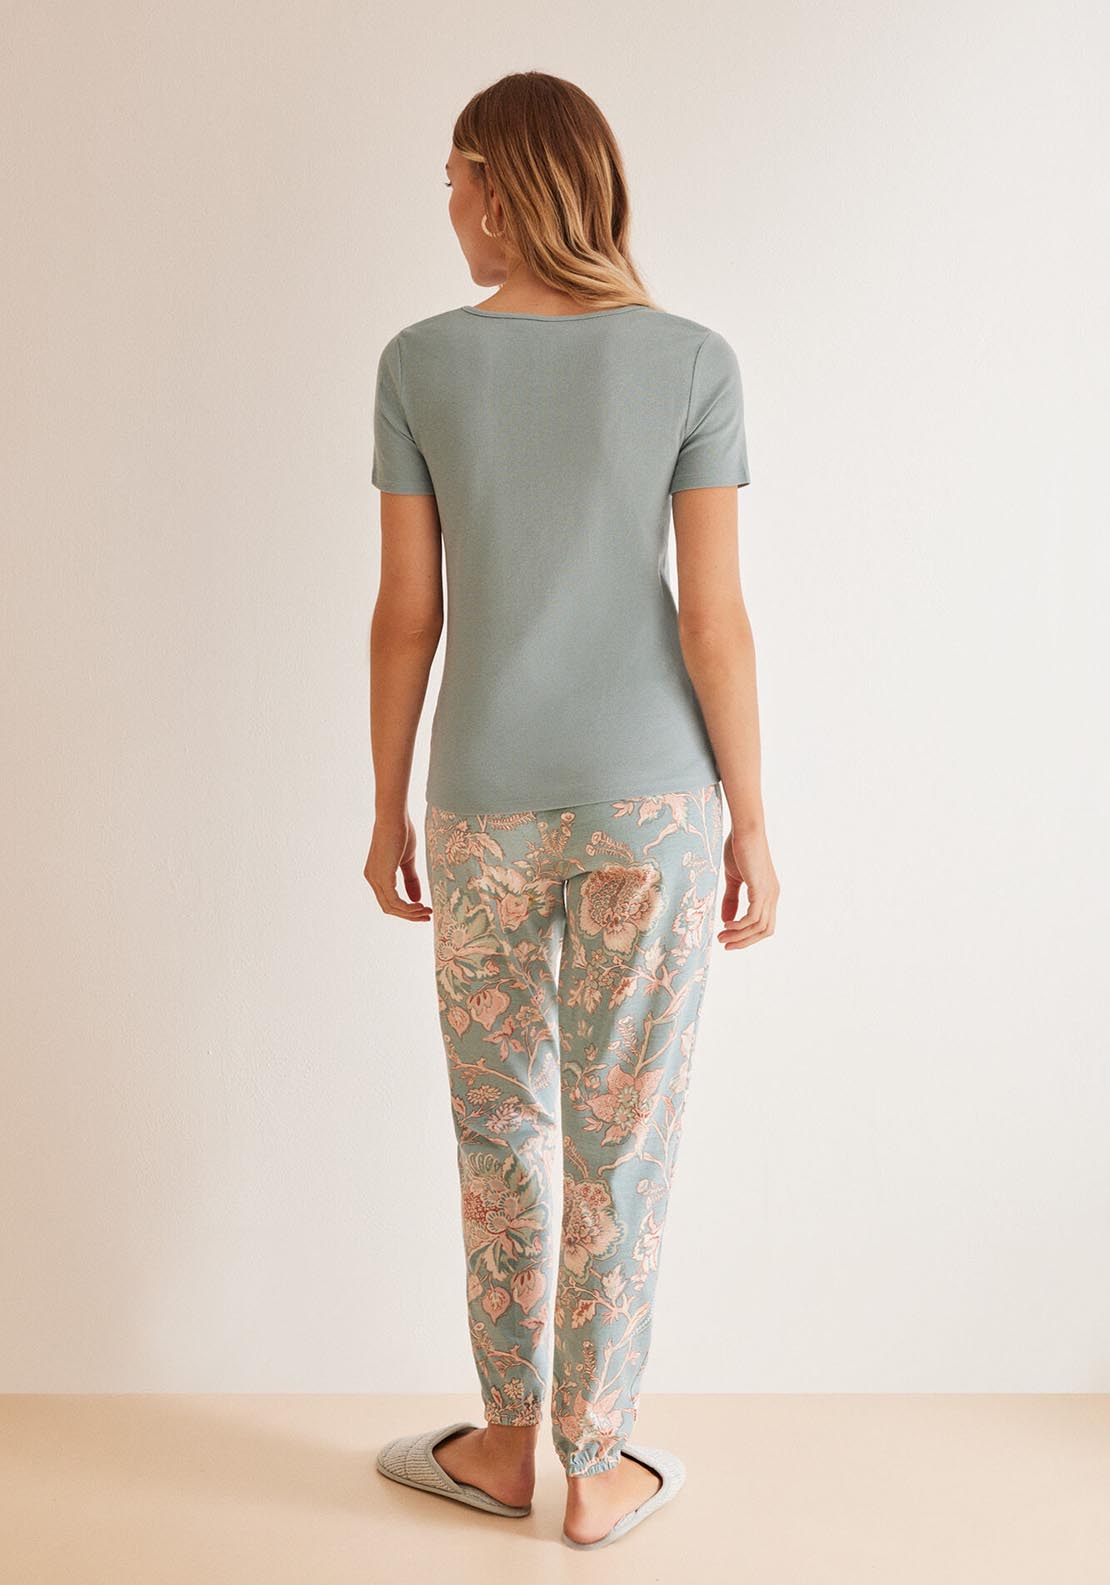 Womens Secret Blue pyjamas in 100% cotton with floral print bottoms - Blue 2 Shaws Department Stores